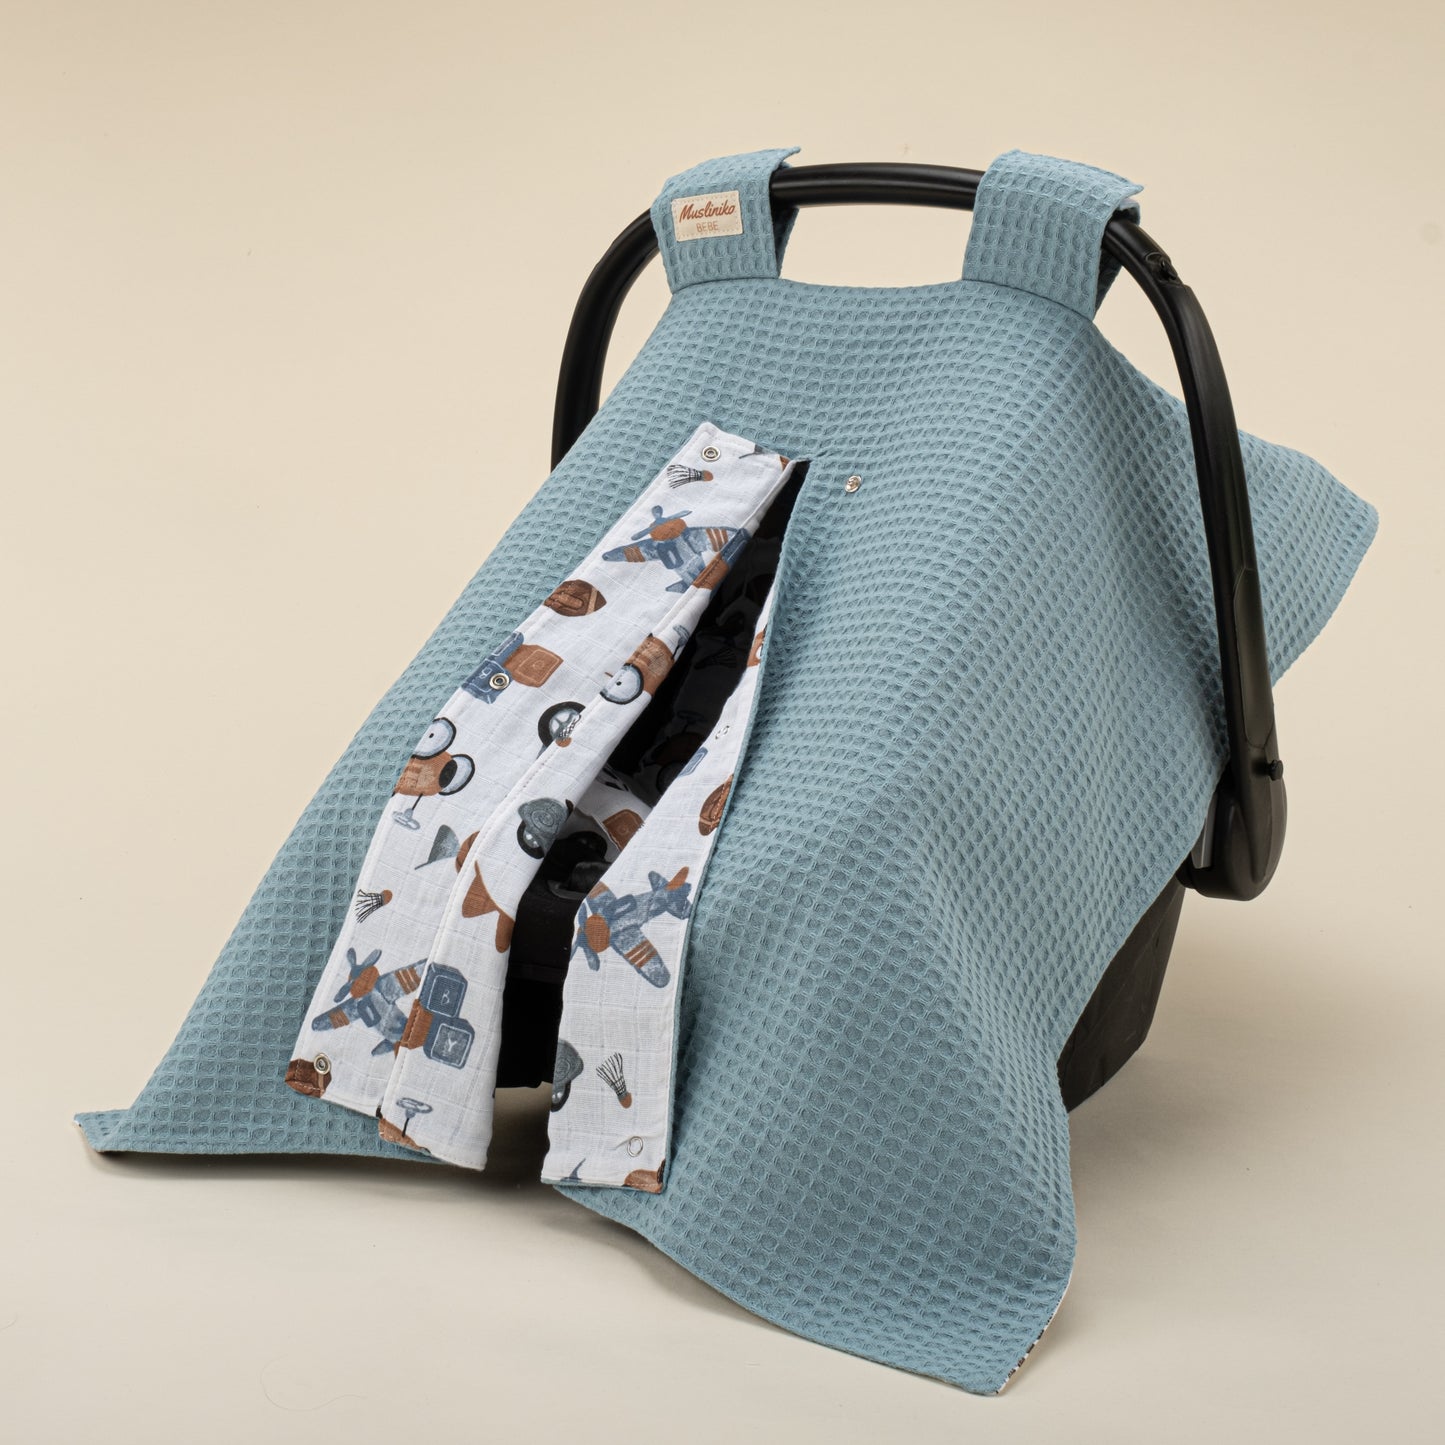 Stroller Cover Set - Double Side - Petrol Blue Honeycomb - Tools